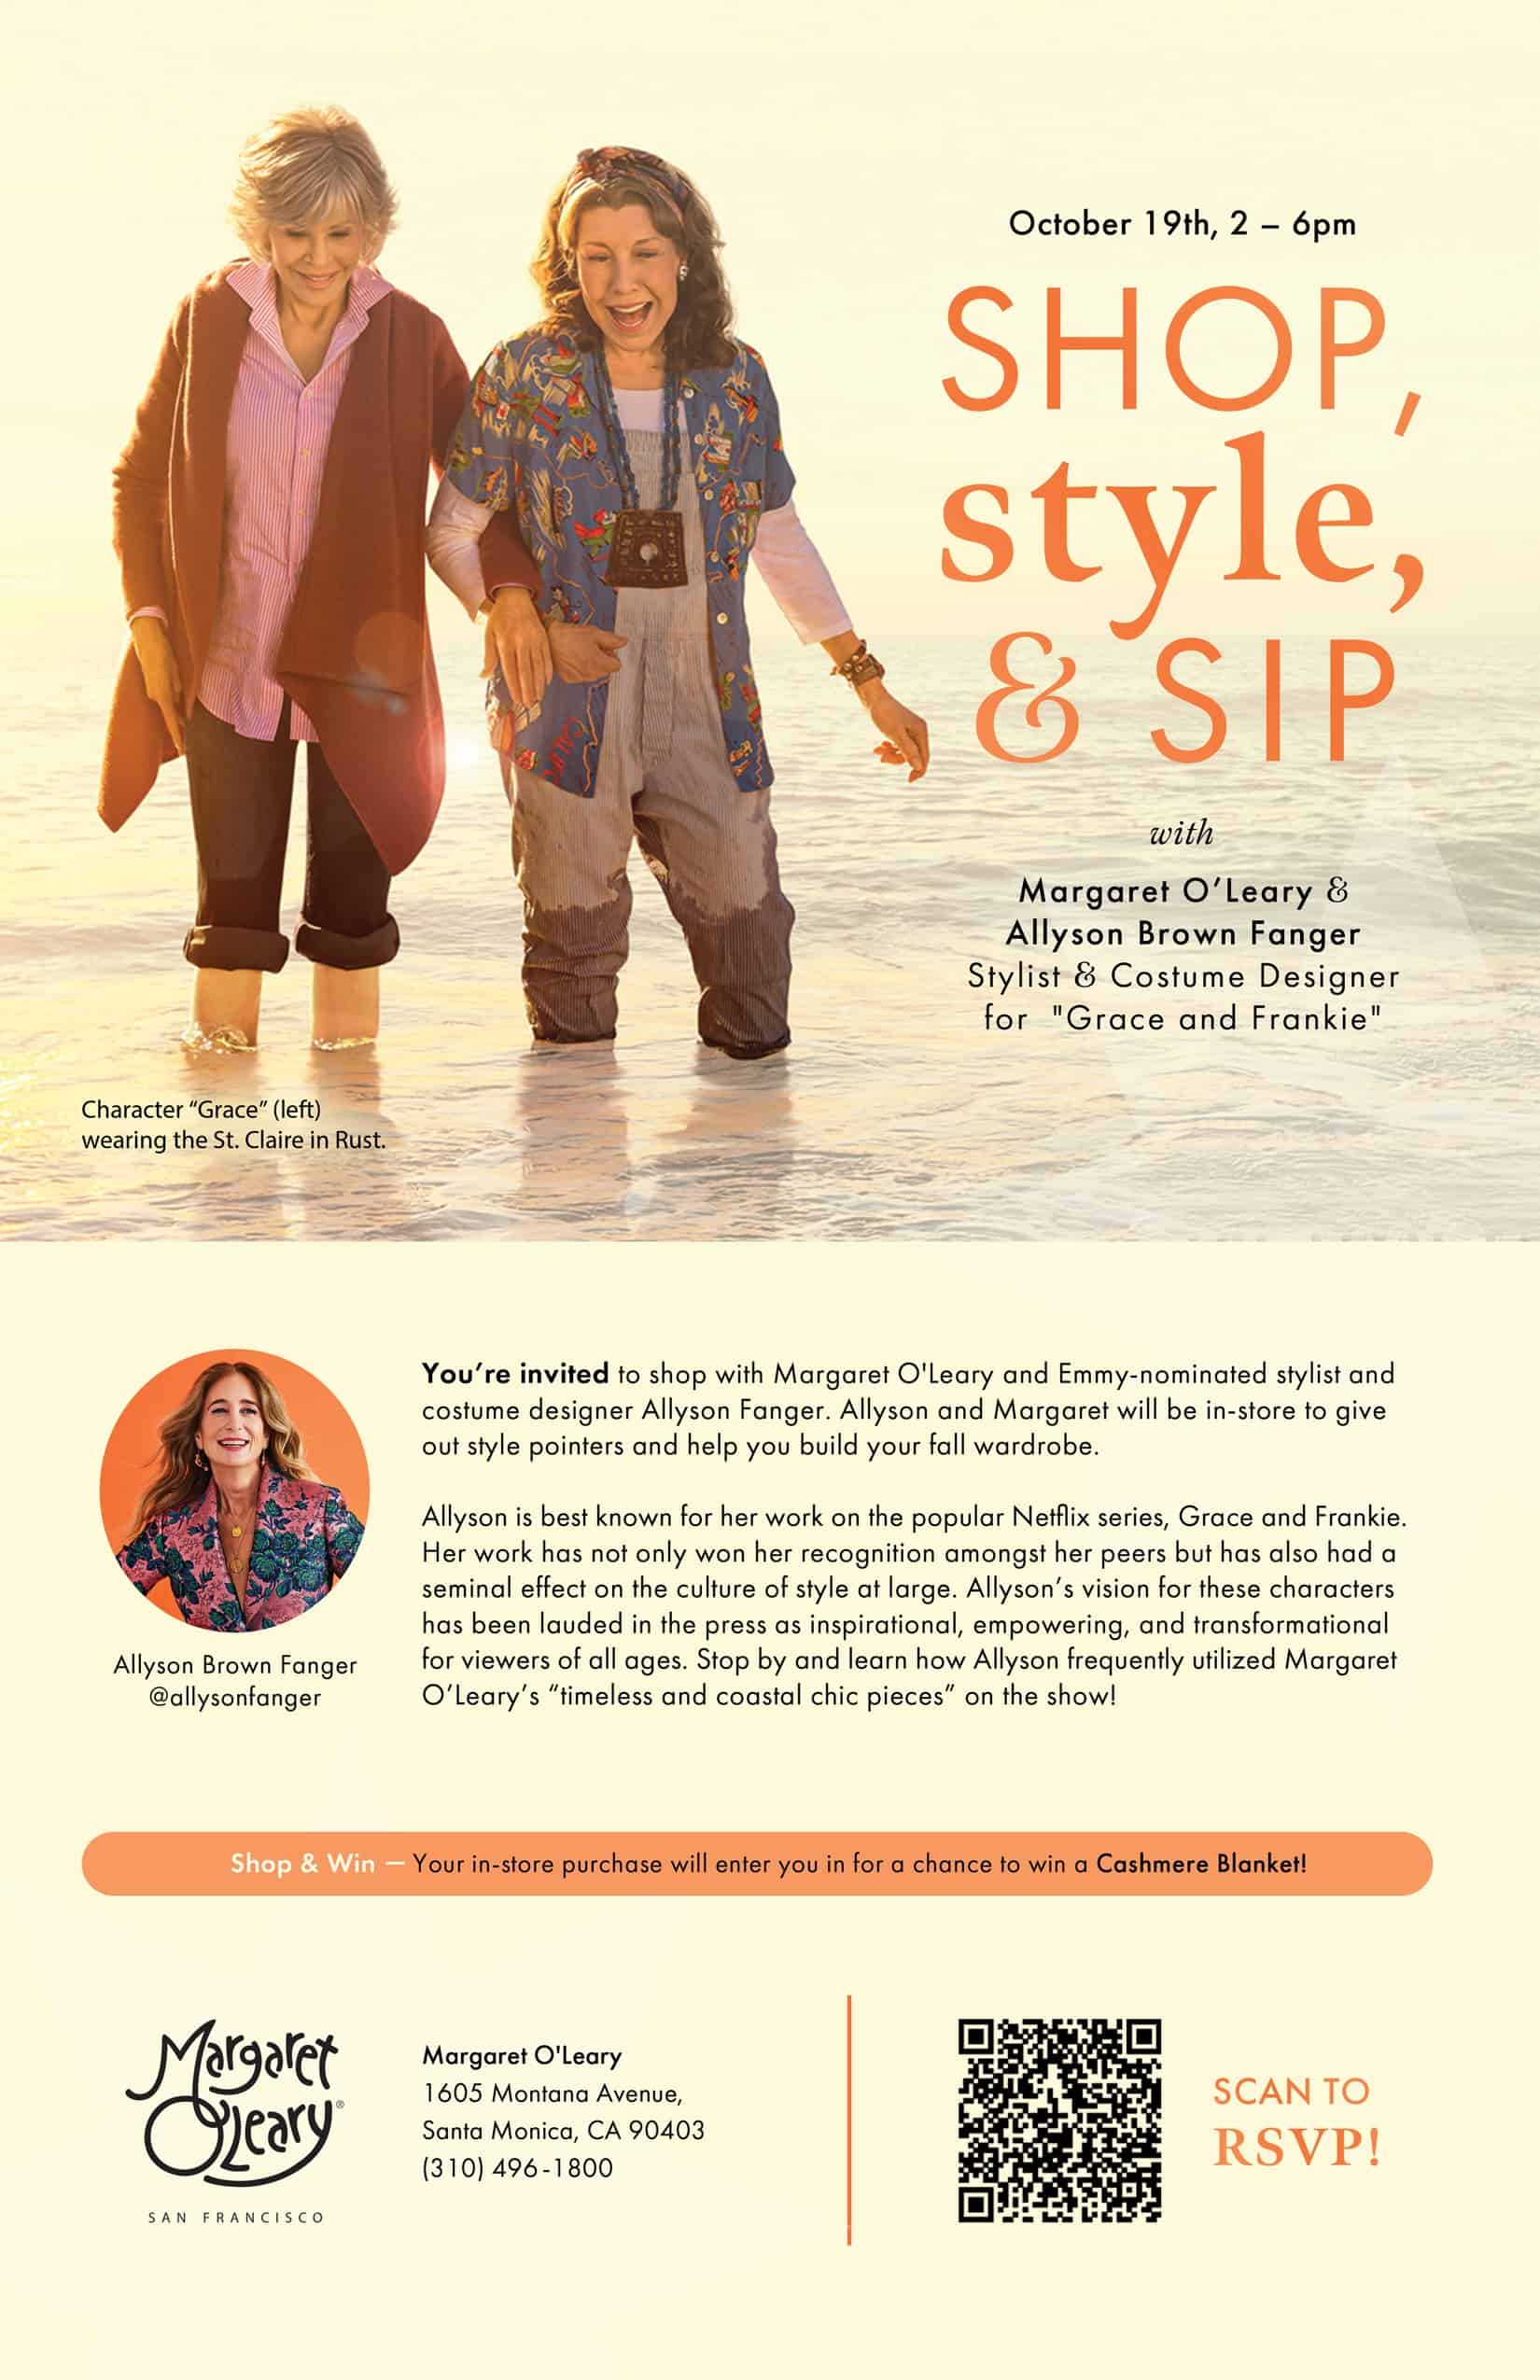 Shop, Style & Sip at Margaret O'Leary